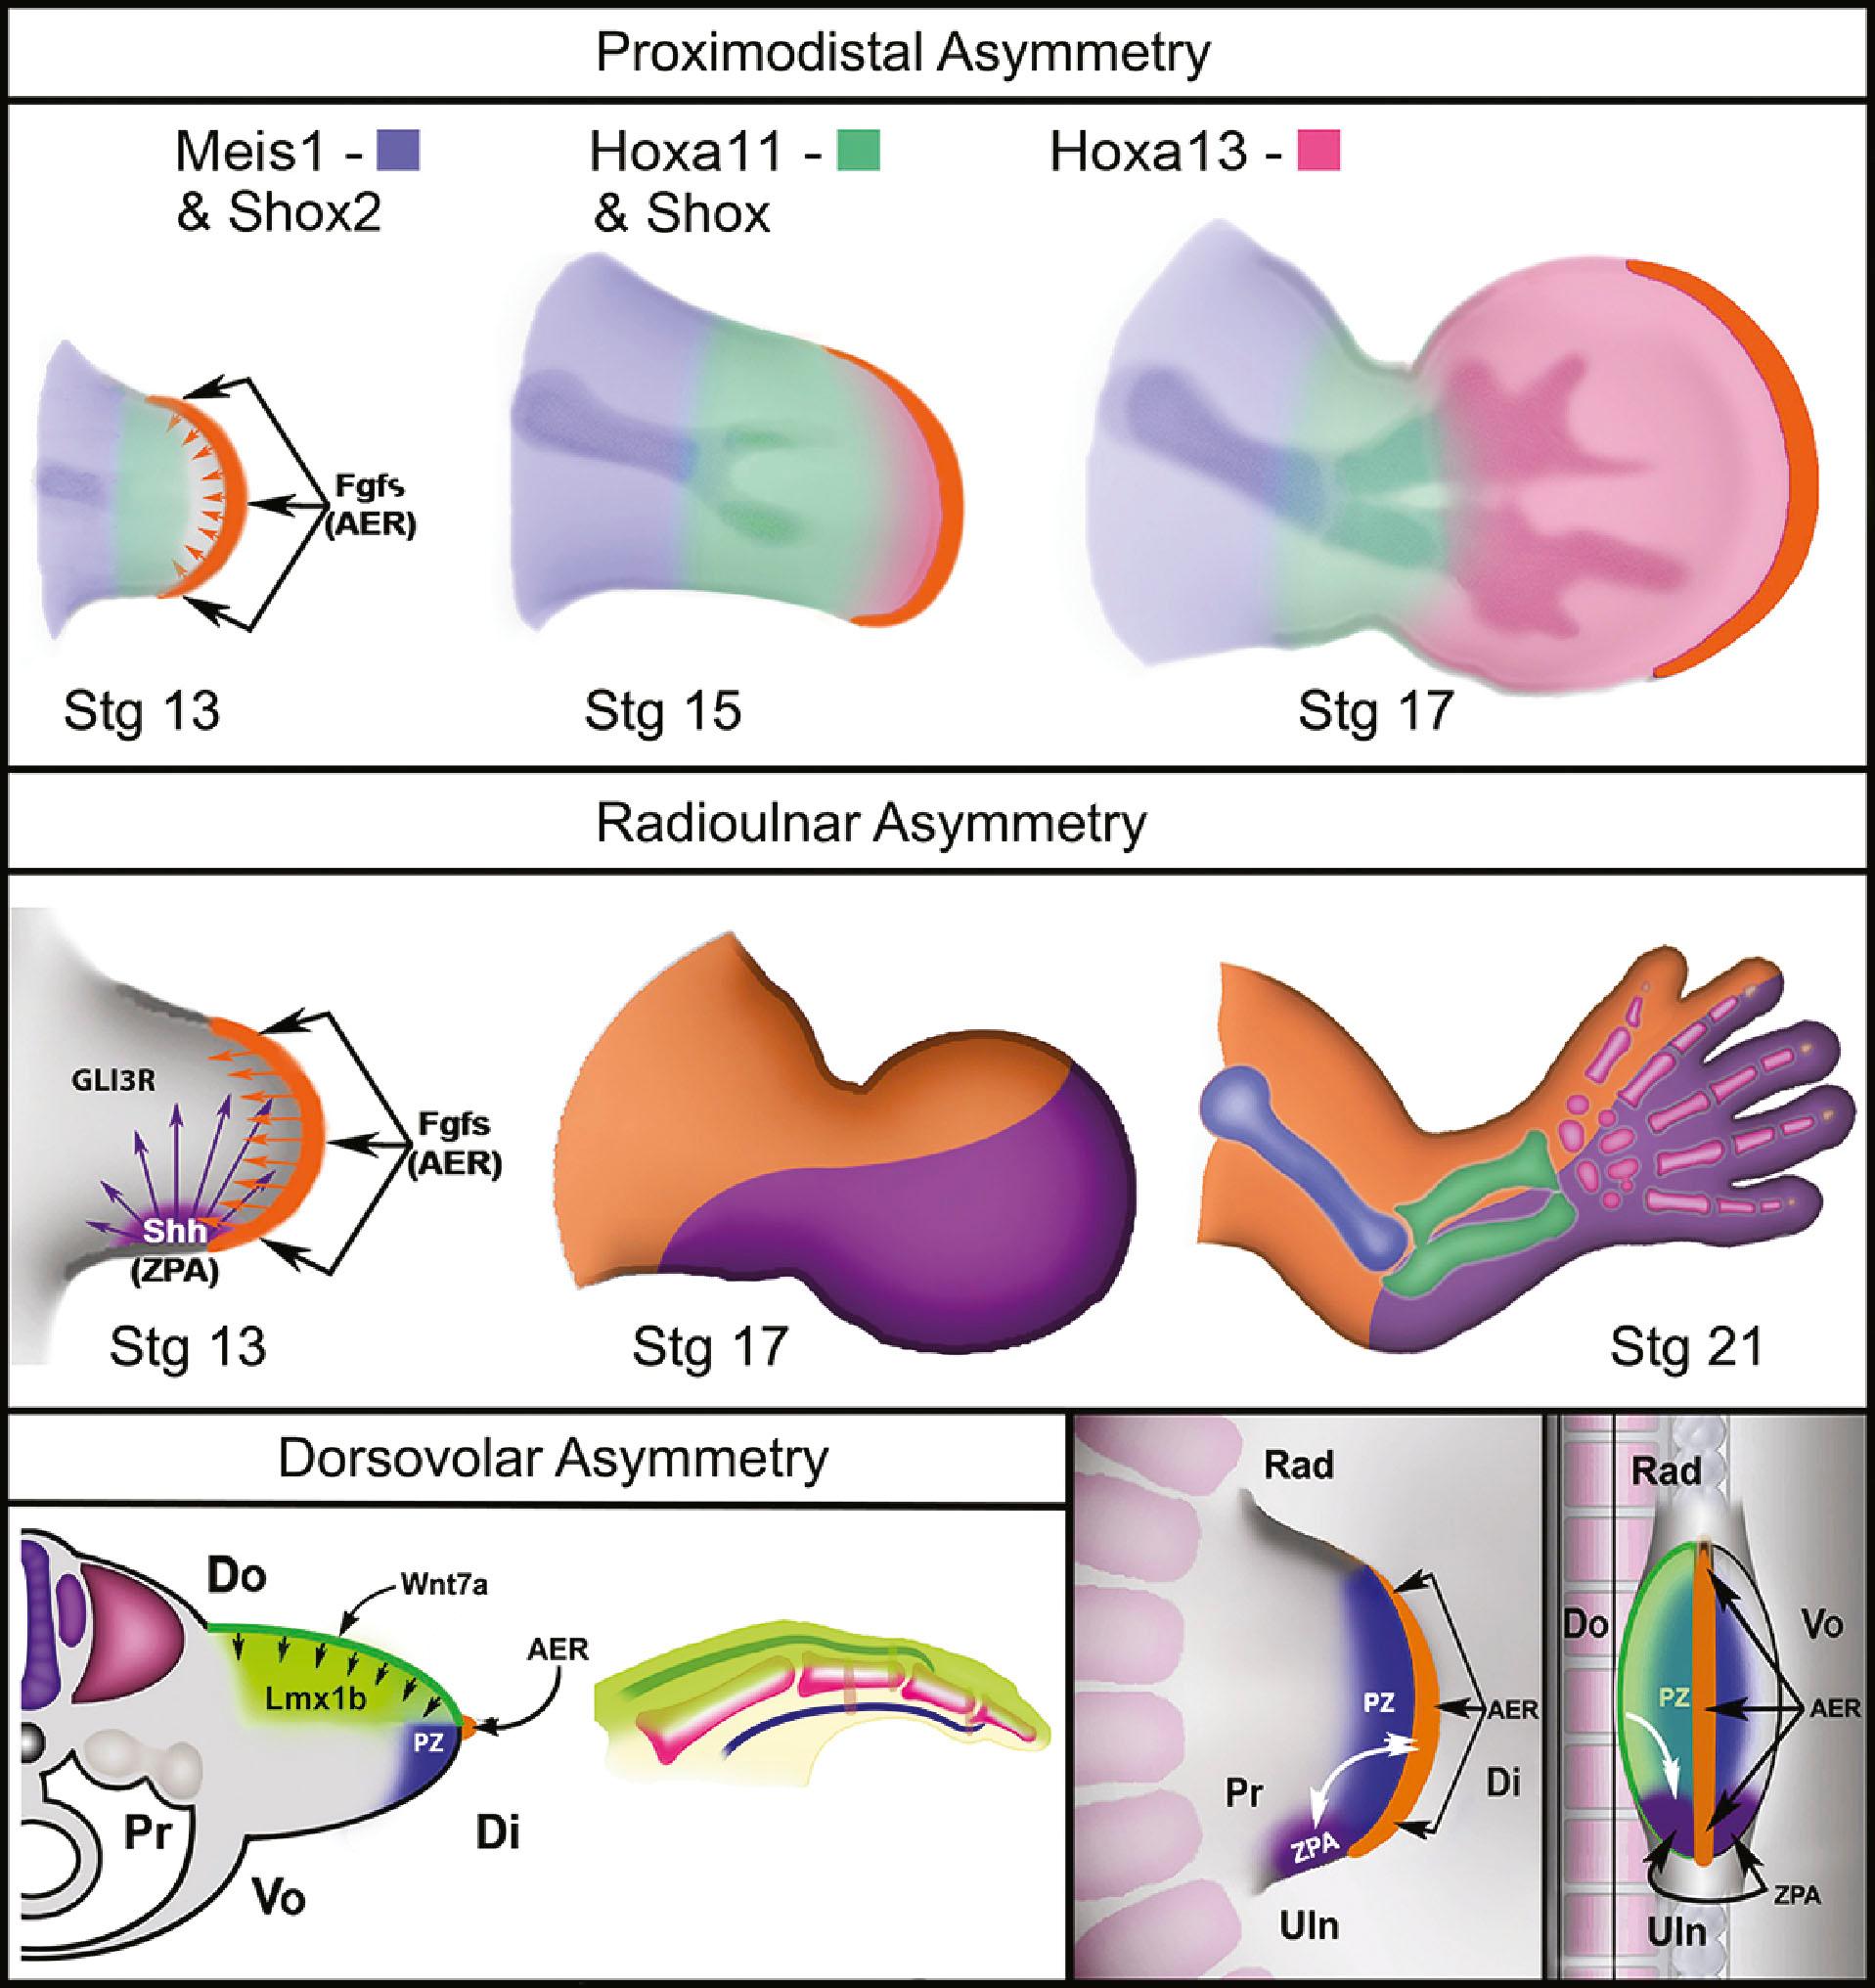 Figure 32.3, Morphologic impact of signaling centers. (Upper panel) Role of apical ectodermal ridge (AER)-related Fgfs (orange) on skeletal outgrowth (humerus, blue; radius and ulna, green; hand, magenta), showing progressive segment specification and segment specific markers (Meis1, Shox2, Hox11, Shox and Hoxa13). (Middle panel) Role of Shh secretion from the zone of polarizing activity (ZPA): influence on the forearm and digits (depicted in purple). (Lower left panel) Role of Wnt7a (medium green) and Lmx1b (light green), from the dorsal ectoderm and mesoderm respectively, in tendon and ligament formation in a digit. Do, Dorsal; Vo, volar; Pr, proximal; Di, distal; PZ, progress zone. (Lower right panel) Illustration depicting integration between signaling centers for coordinated limb patterning – reciprocal Shh–Fgf loop (black bidirectional arrow). Wnt7a influence on Shh expression (black unidirectional arrow). AER is also formed at the dorsal-ventral boundary. Rad, Radial; Uln, ulnar.